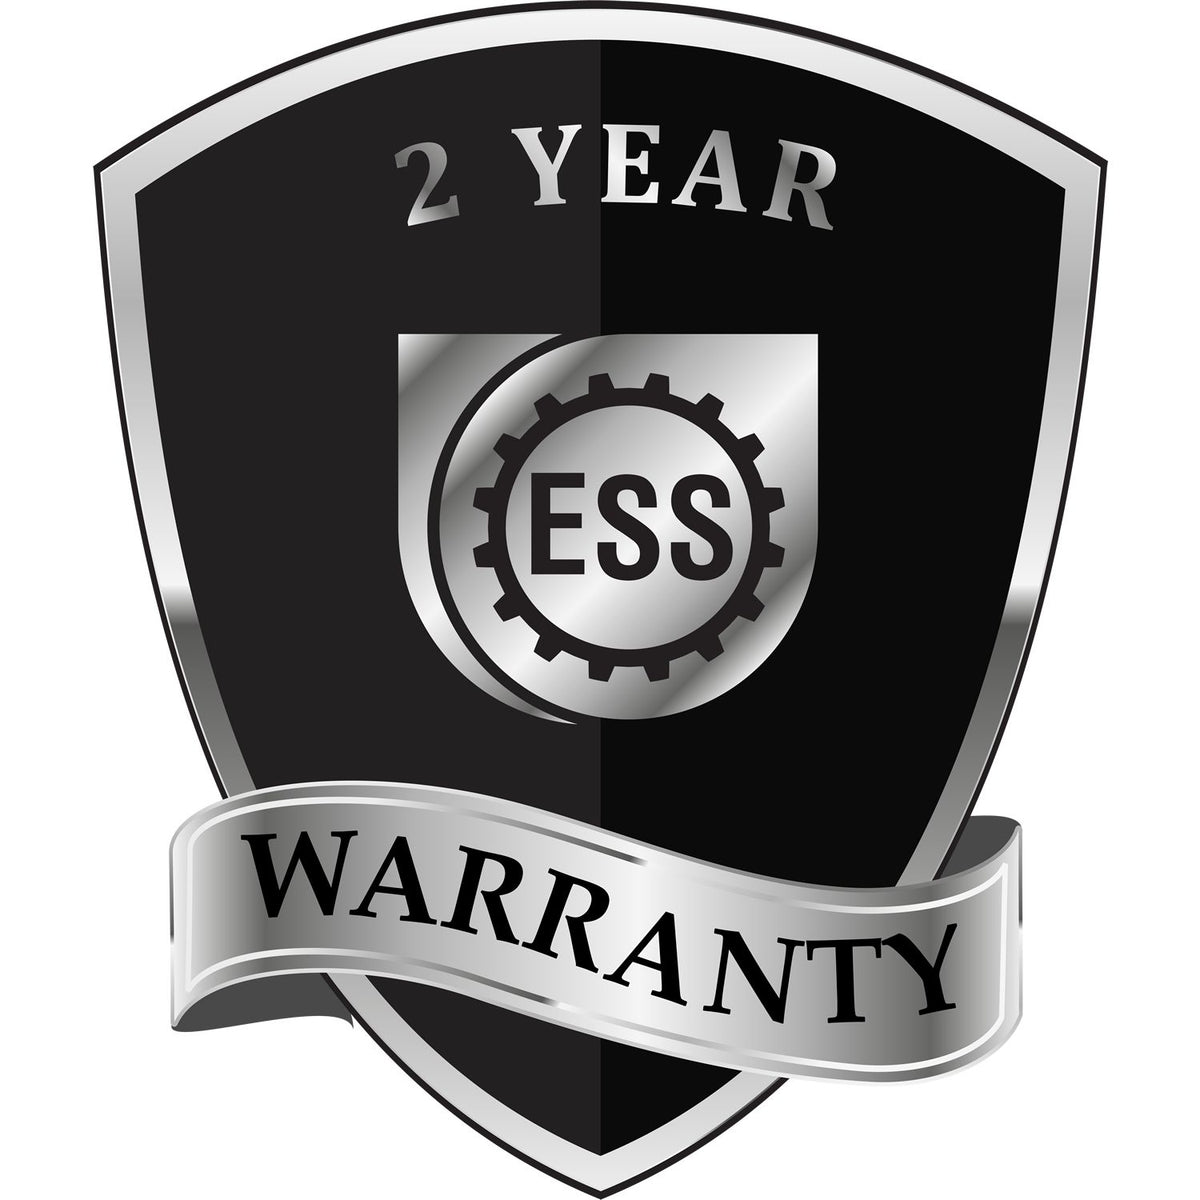 A black and silver badge or emblem showing warranty information for the State of New York Extended Long Reach Geologist Seal